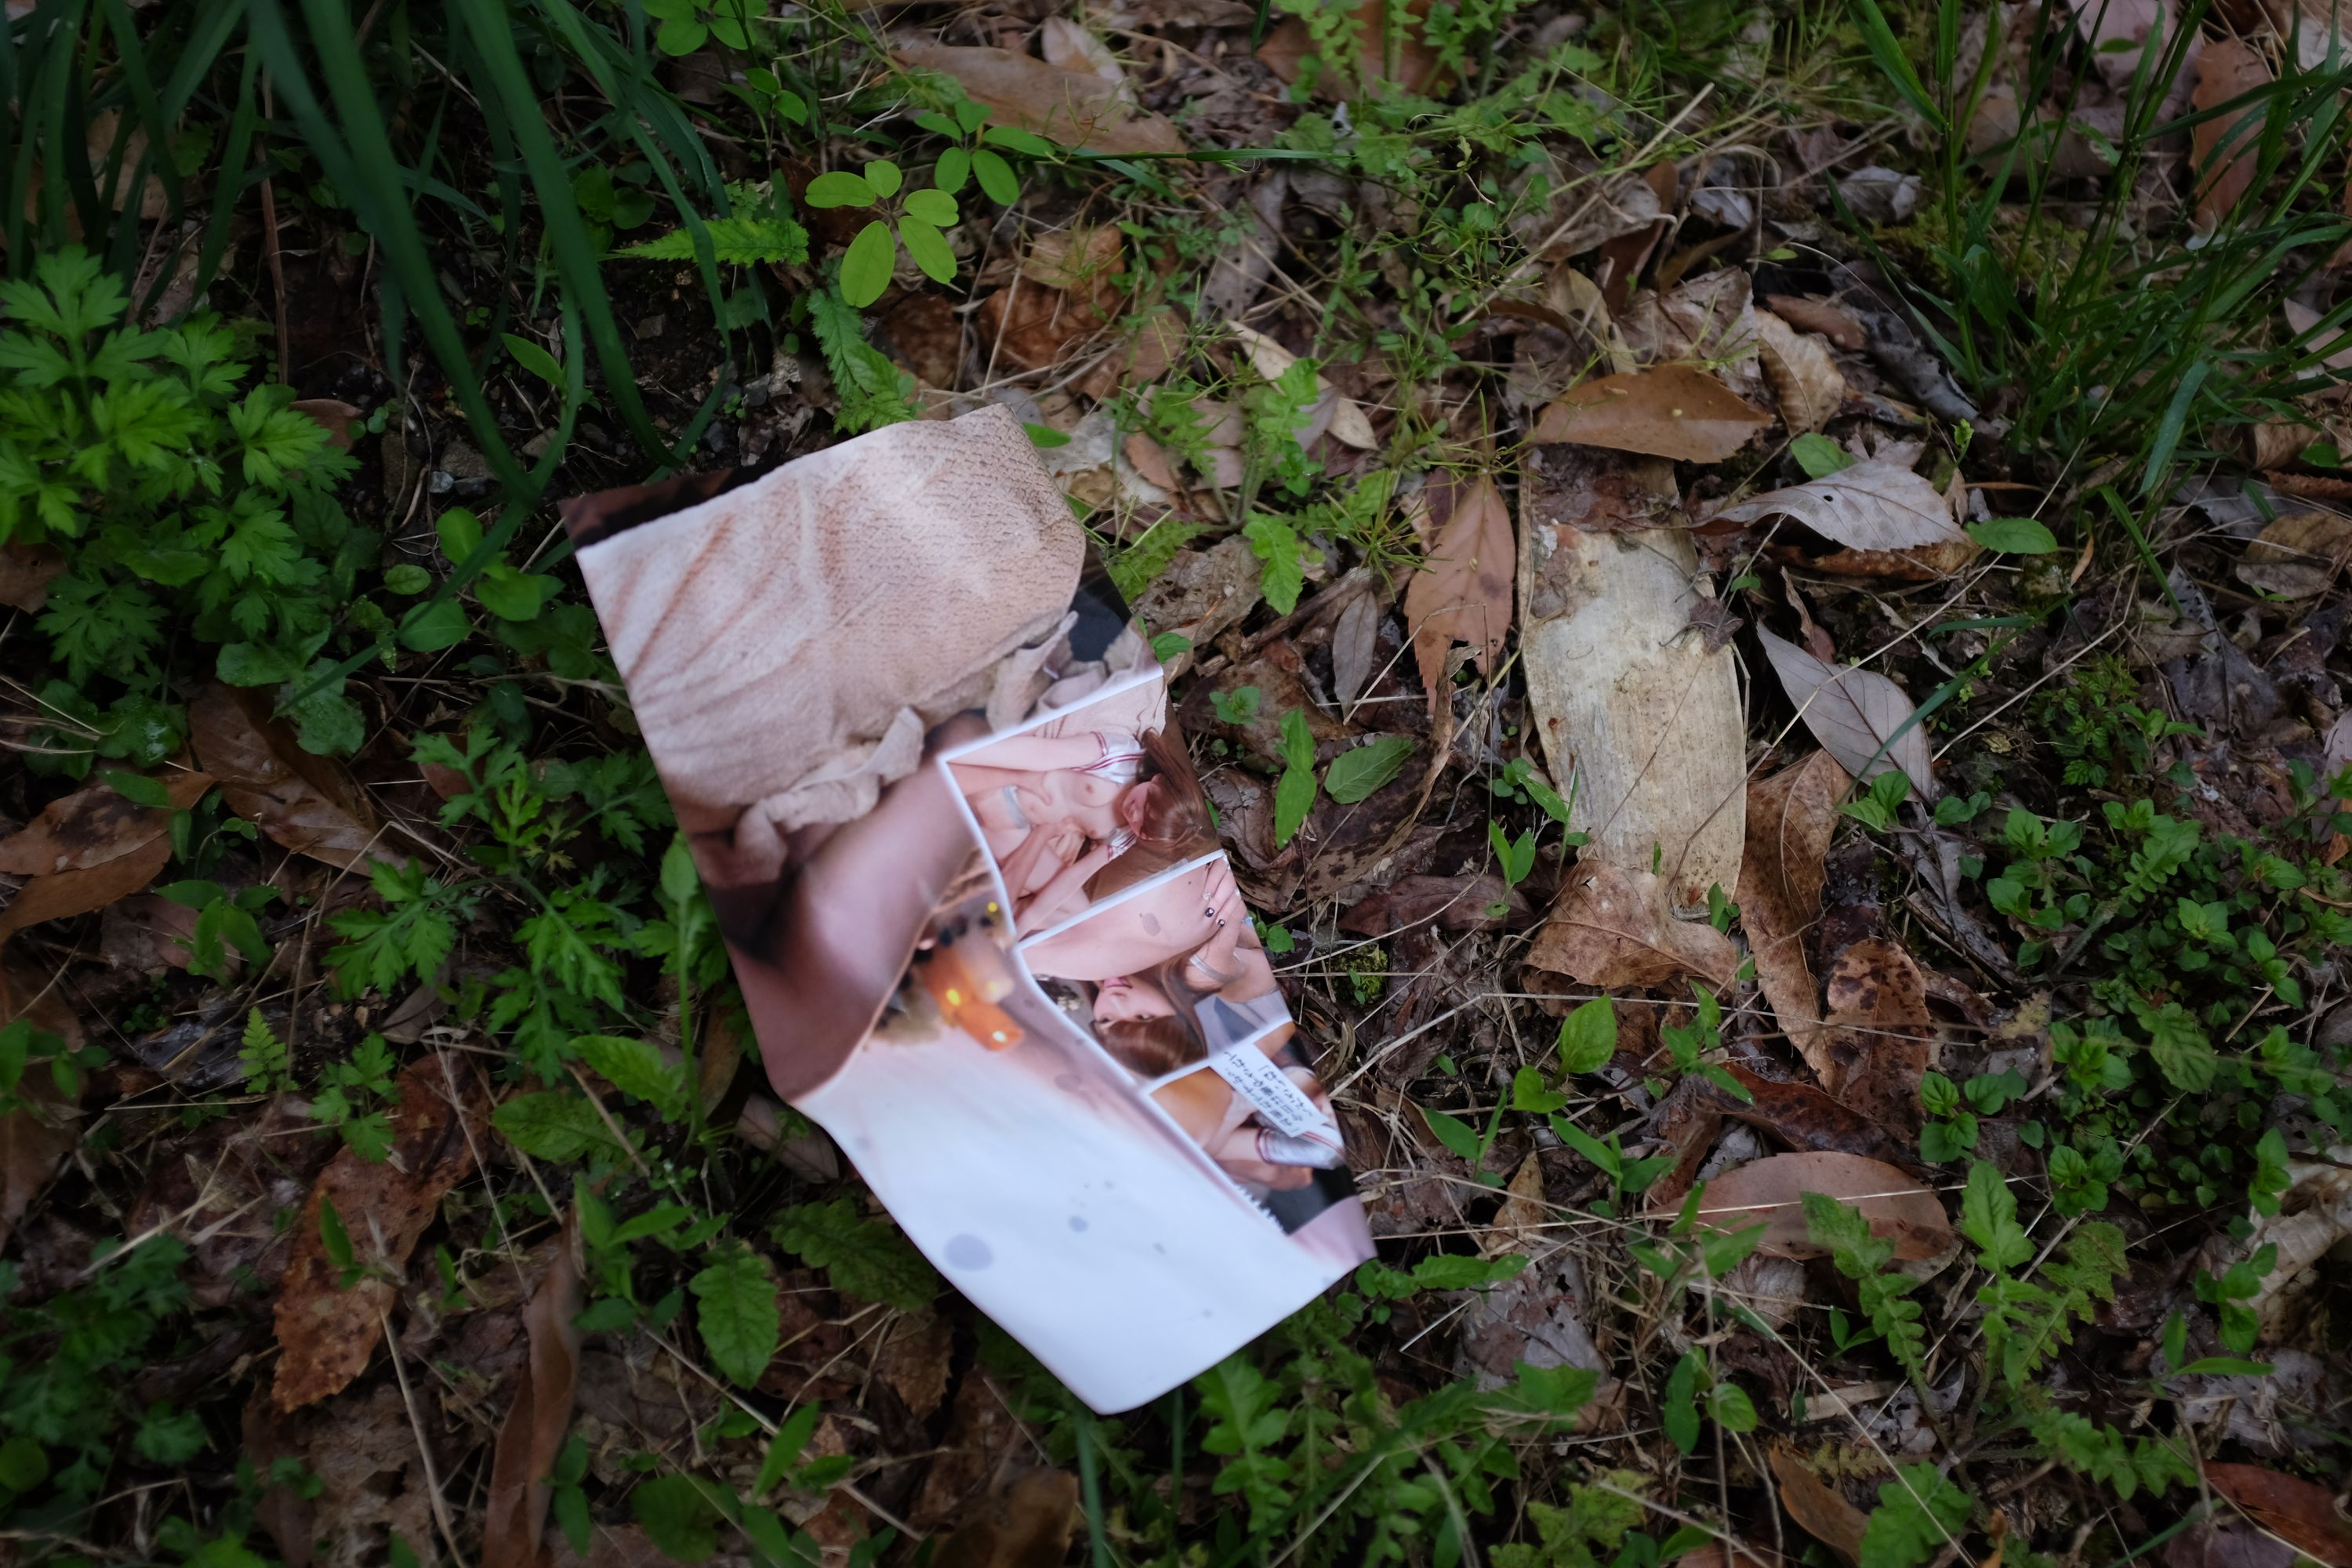 An abandoned porn magazine in the bushes.